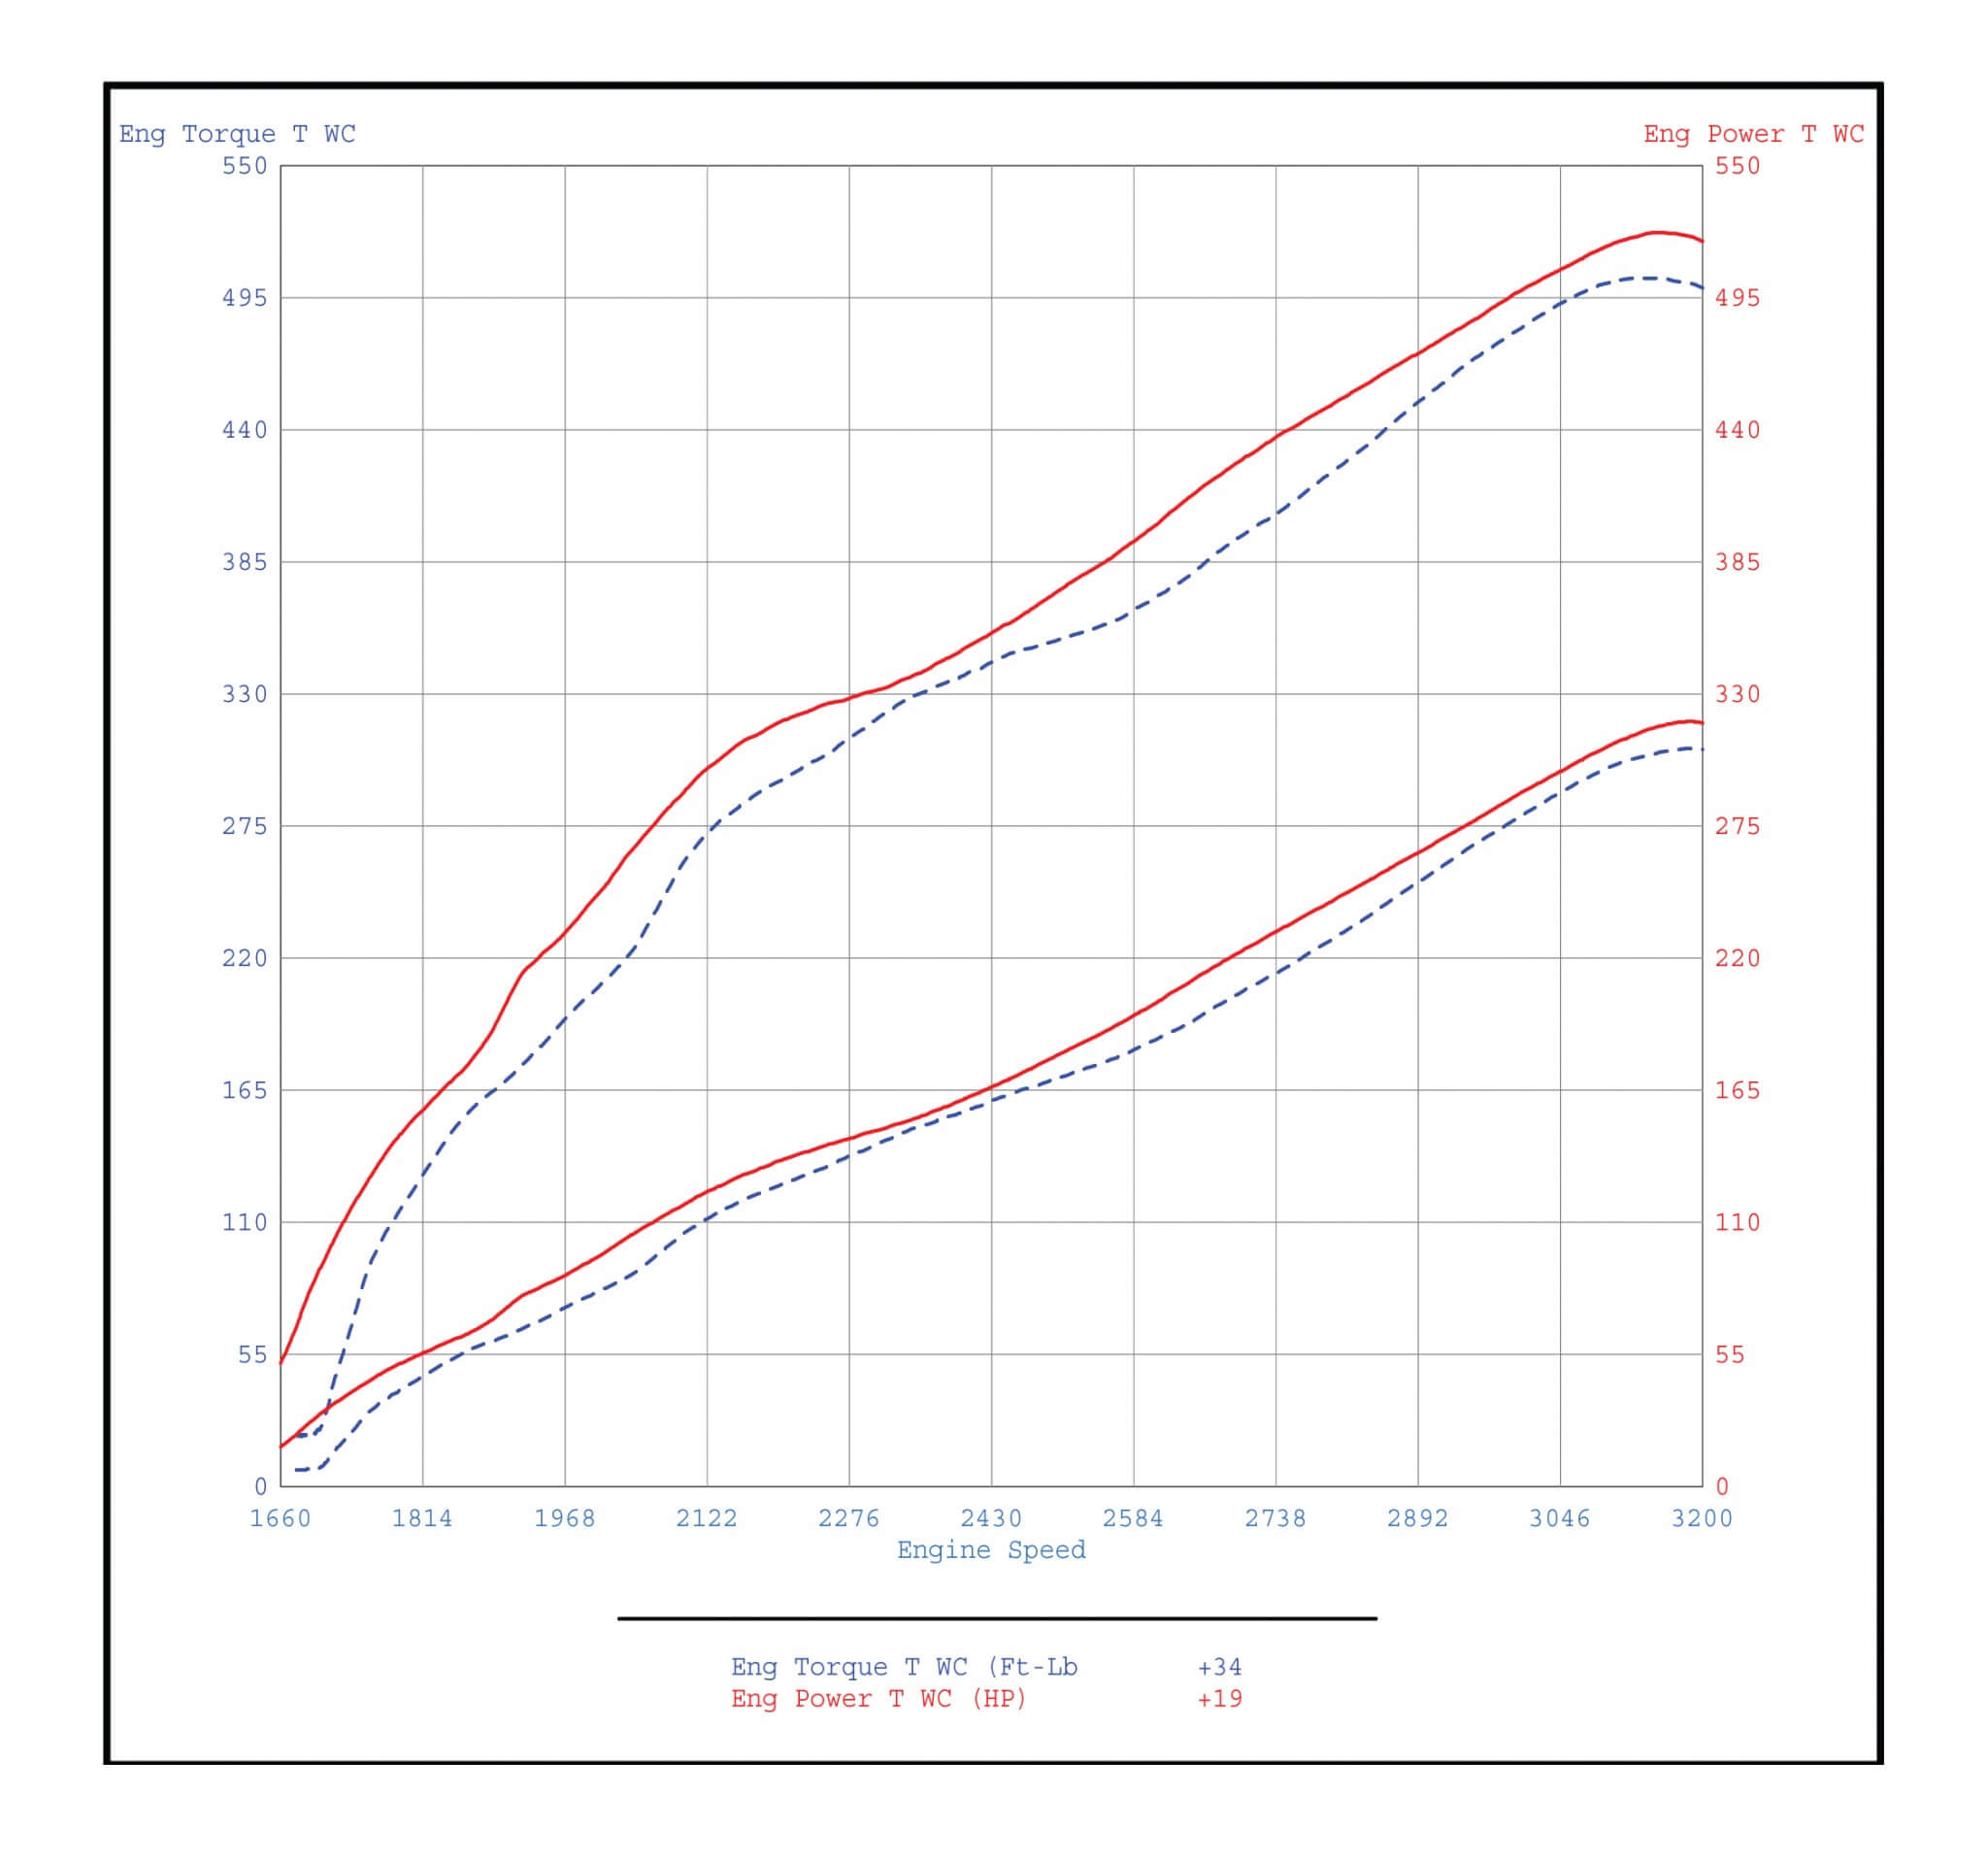 14. As promised, here’s the performance data from AIRAID’s all-wheel-drive Mustang chassis dyno: 19 horsepower and 34 lb.-ft. of torque. As you can also see, the kit helps throughout the rpm range instead of only peak numbers, indicating substantial drivability improvements. Not bad for about half an hour’s worth of work.